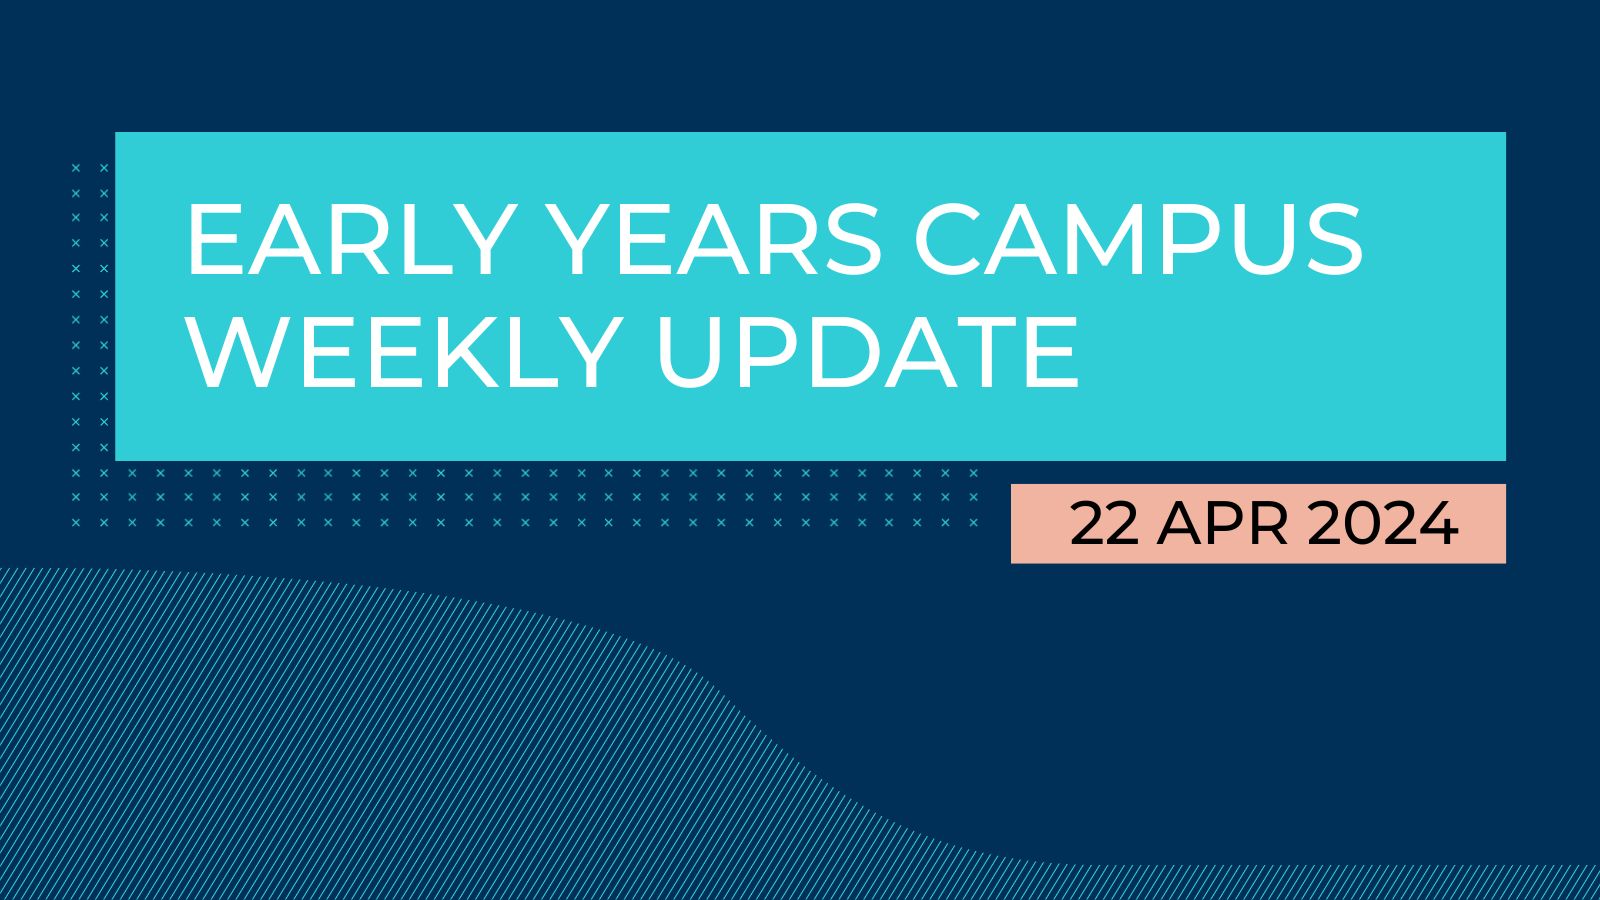 Early Years Campus Weekly Update - Early Years Campus Weekly Update